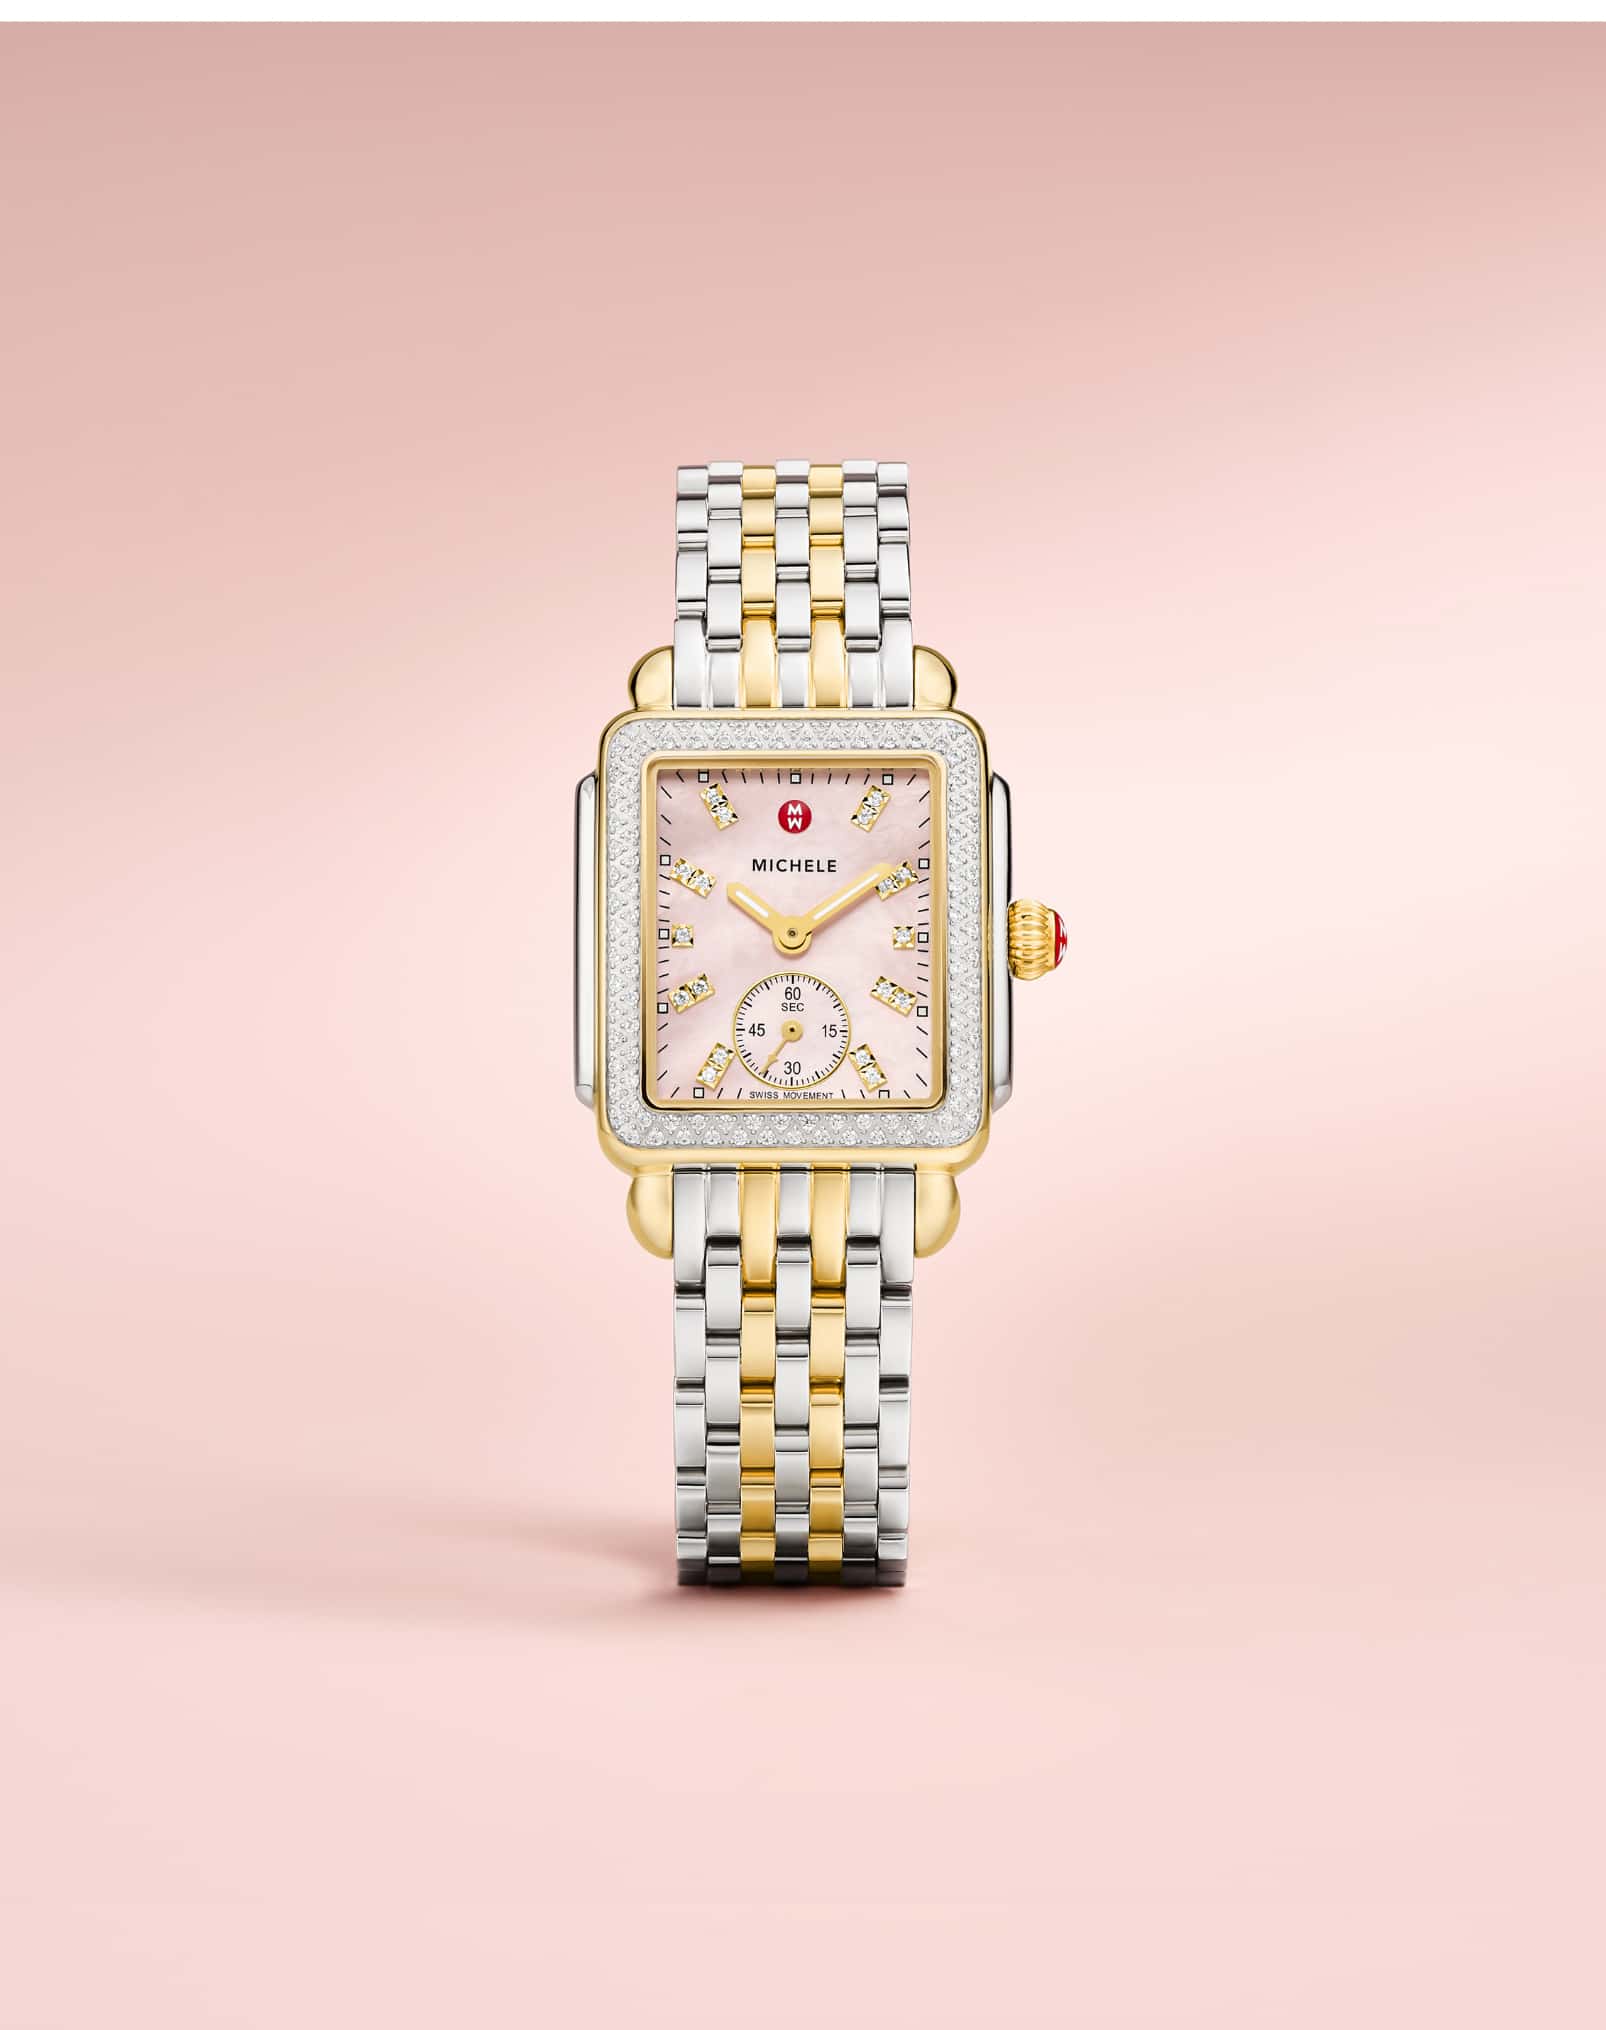 MICHELE Deco Mid watch in two-tone with a pink mother-of-pearl dial